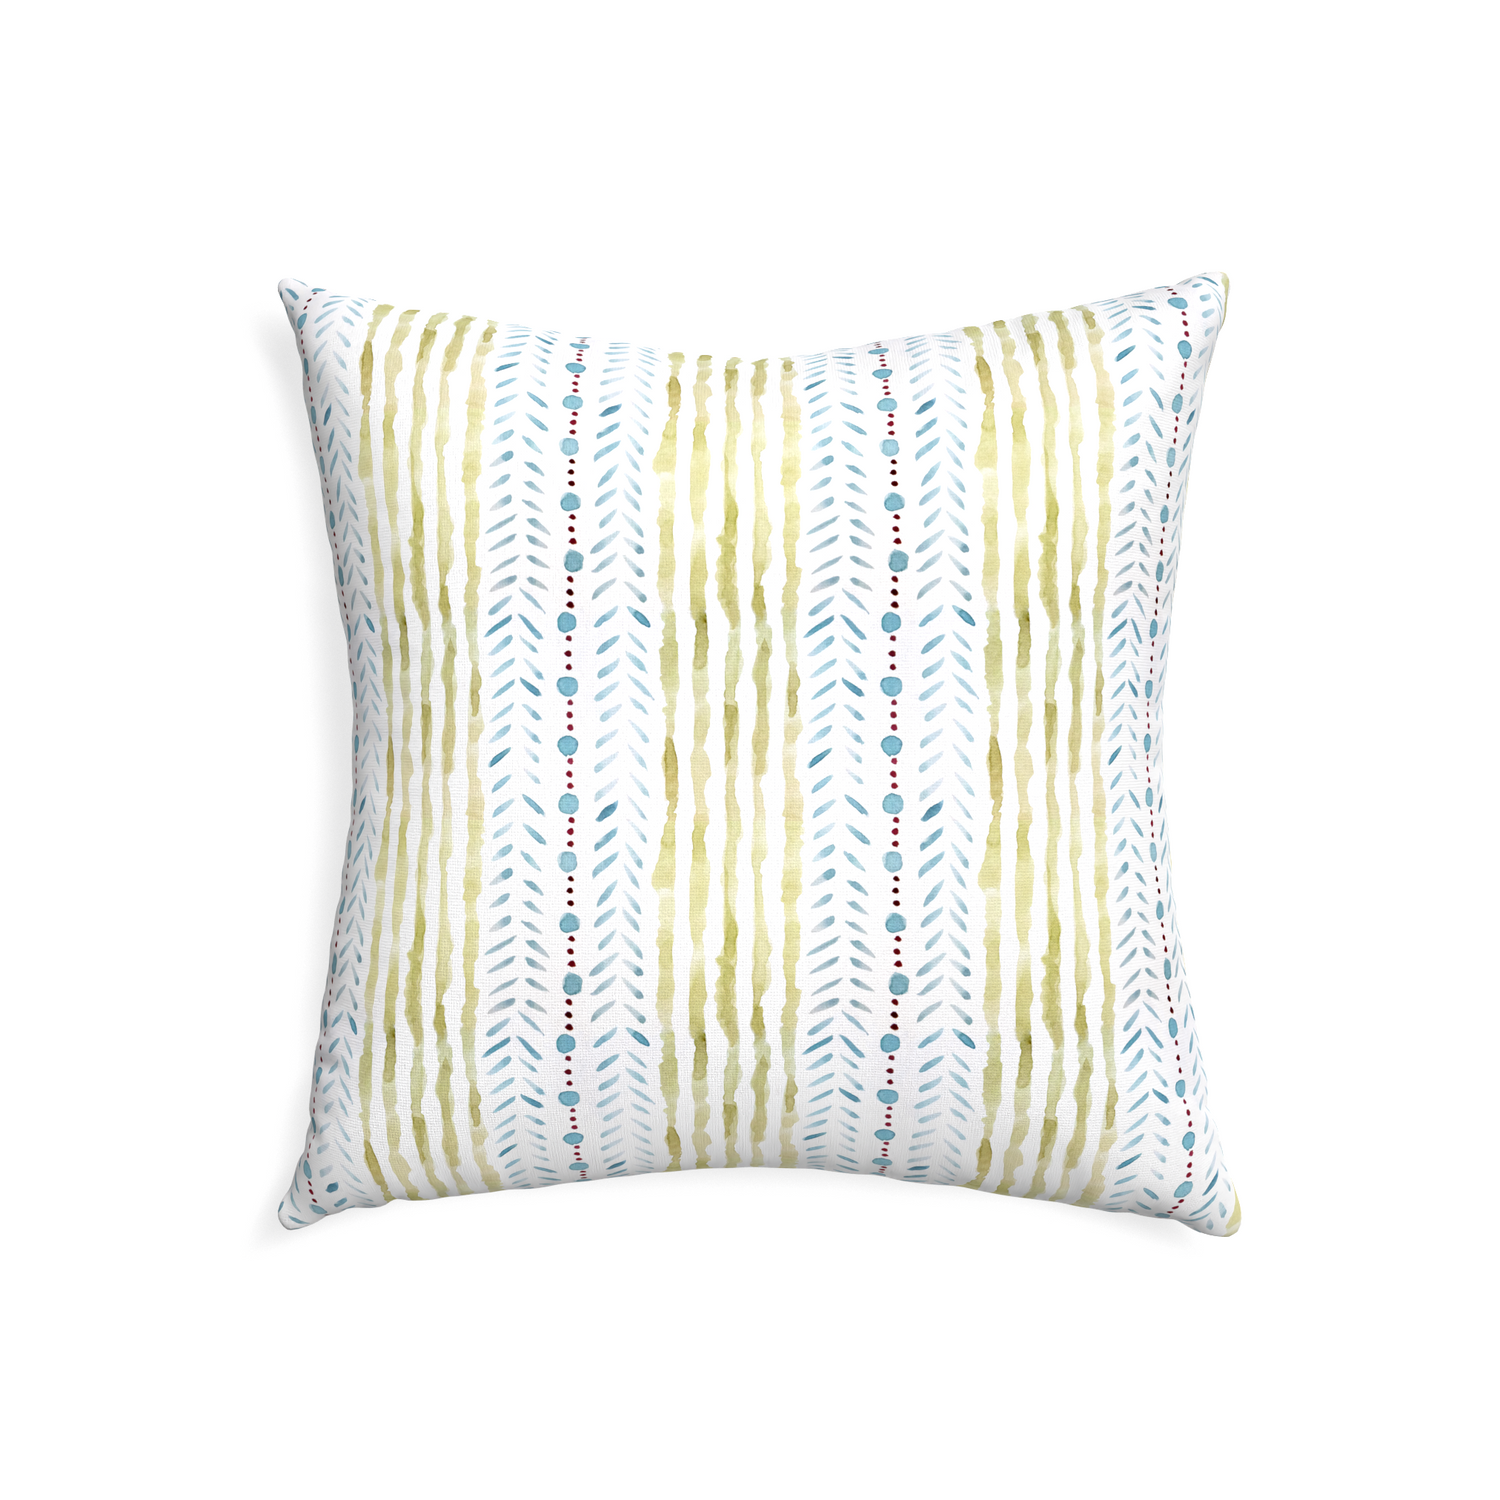 22-square julia custom blue & green stripedpillow with none on white background